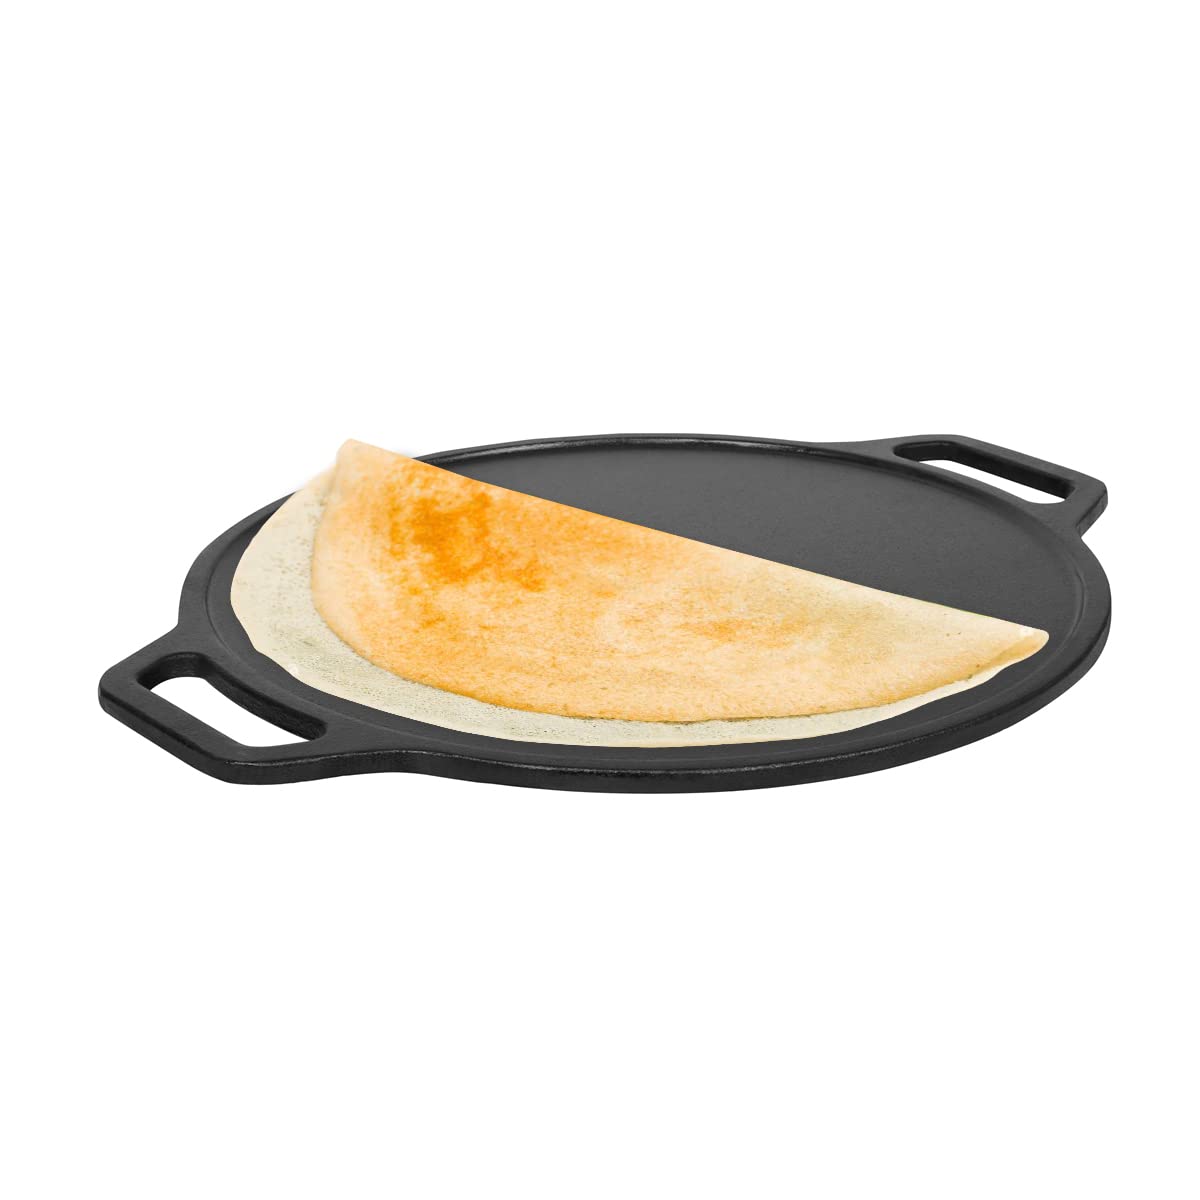 New EUGOR Now in India Pre Seasoned Cast Iron 12 Inches / 304MM Dosa Tawa